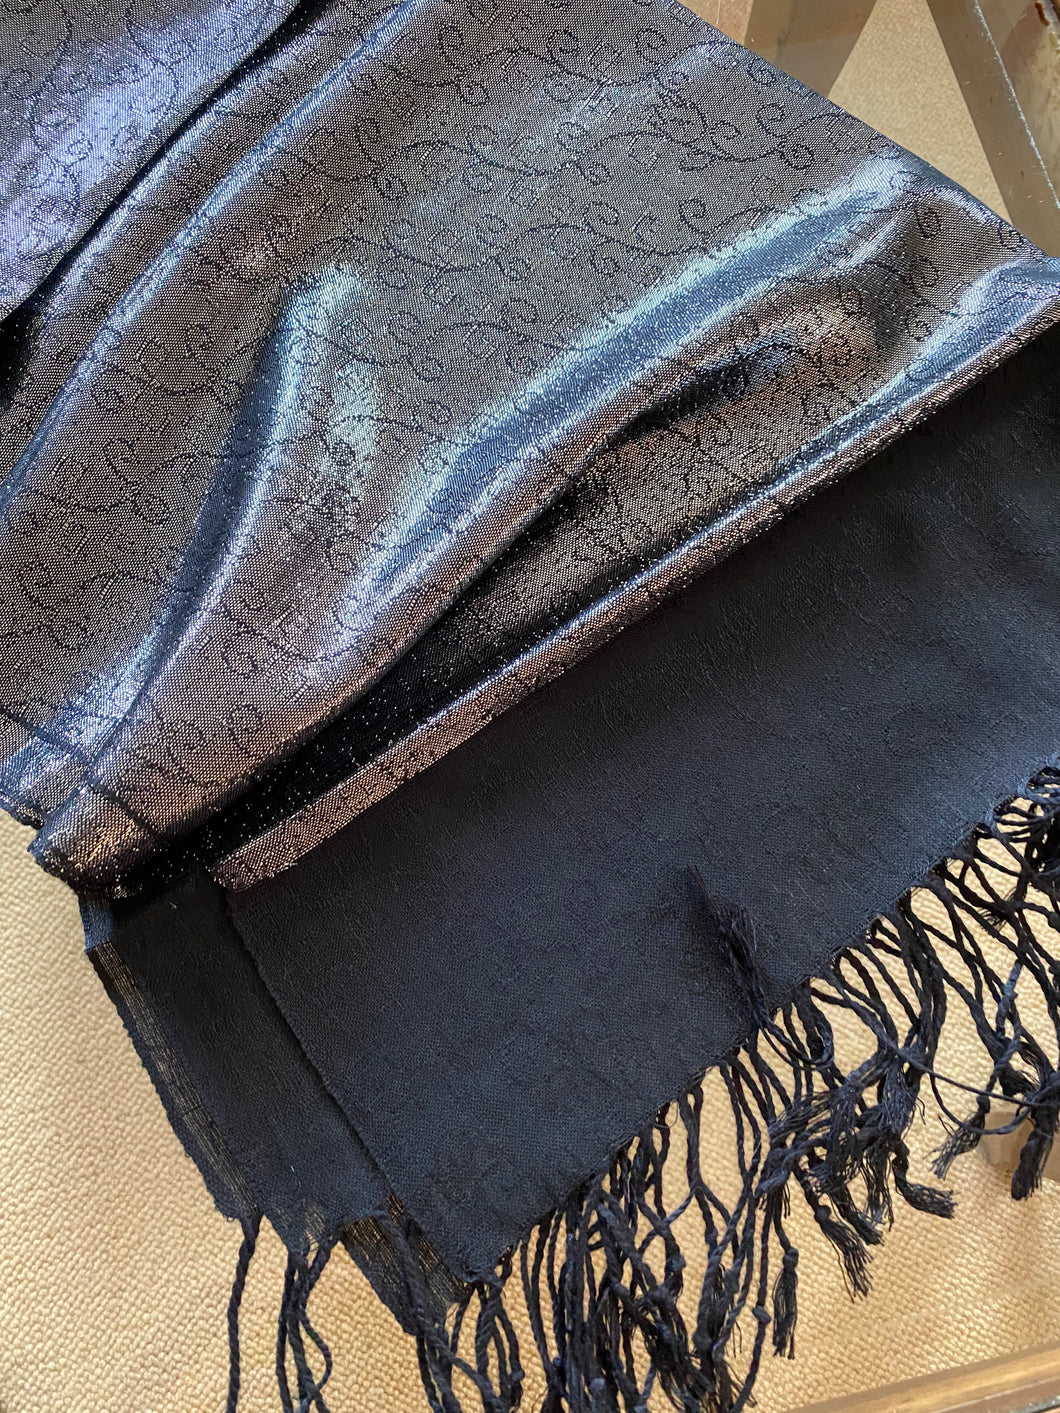 WI128 Metallic silver scarf with black border ends and tassles